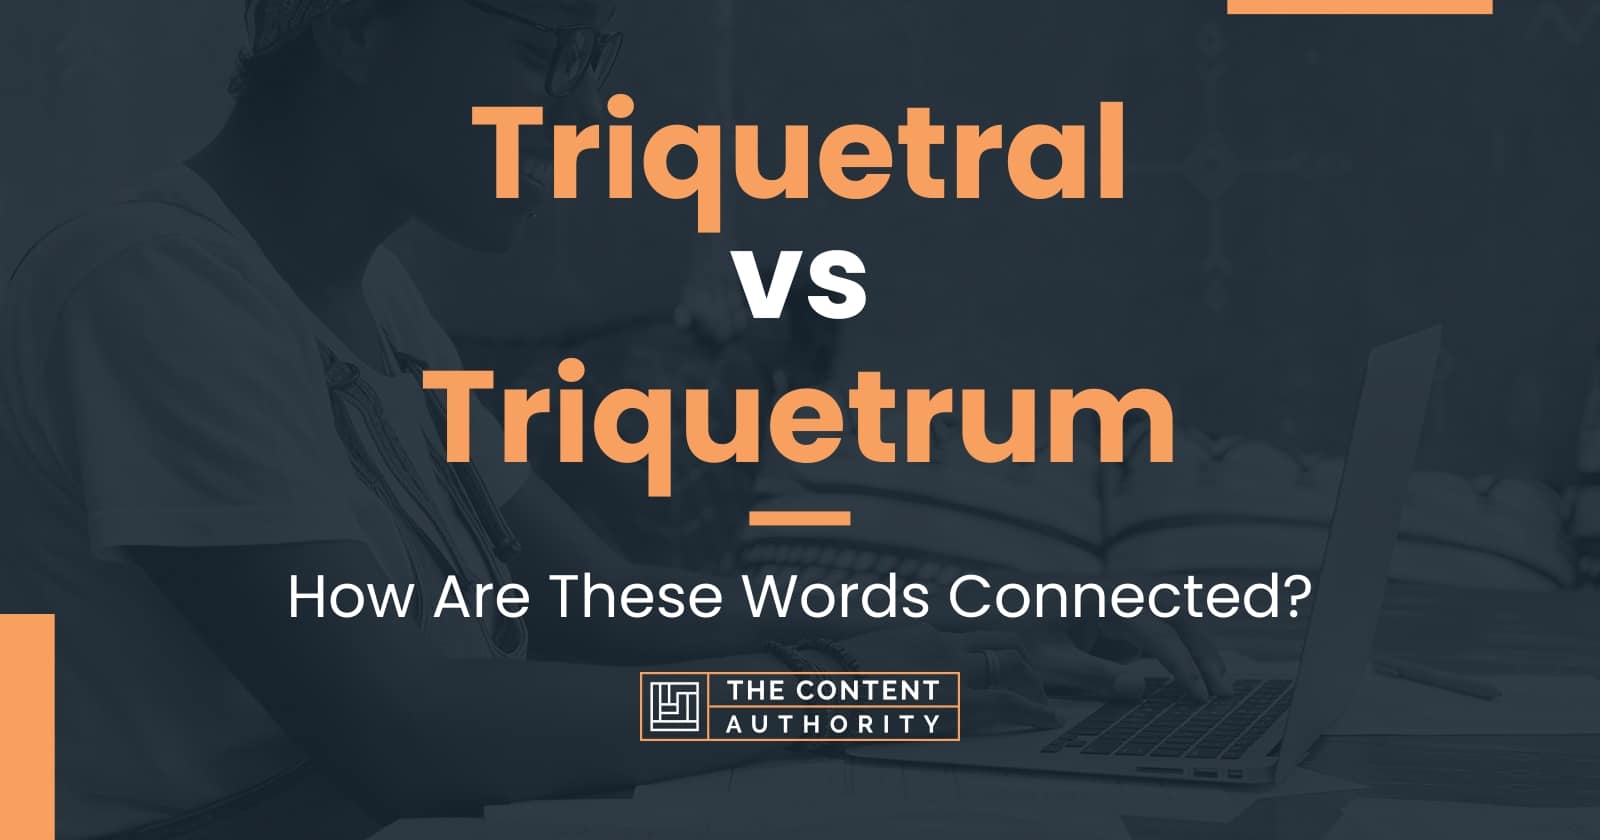 Triquetral vs Triquetrum: How Are These Words Connected?